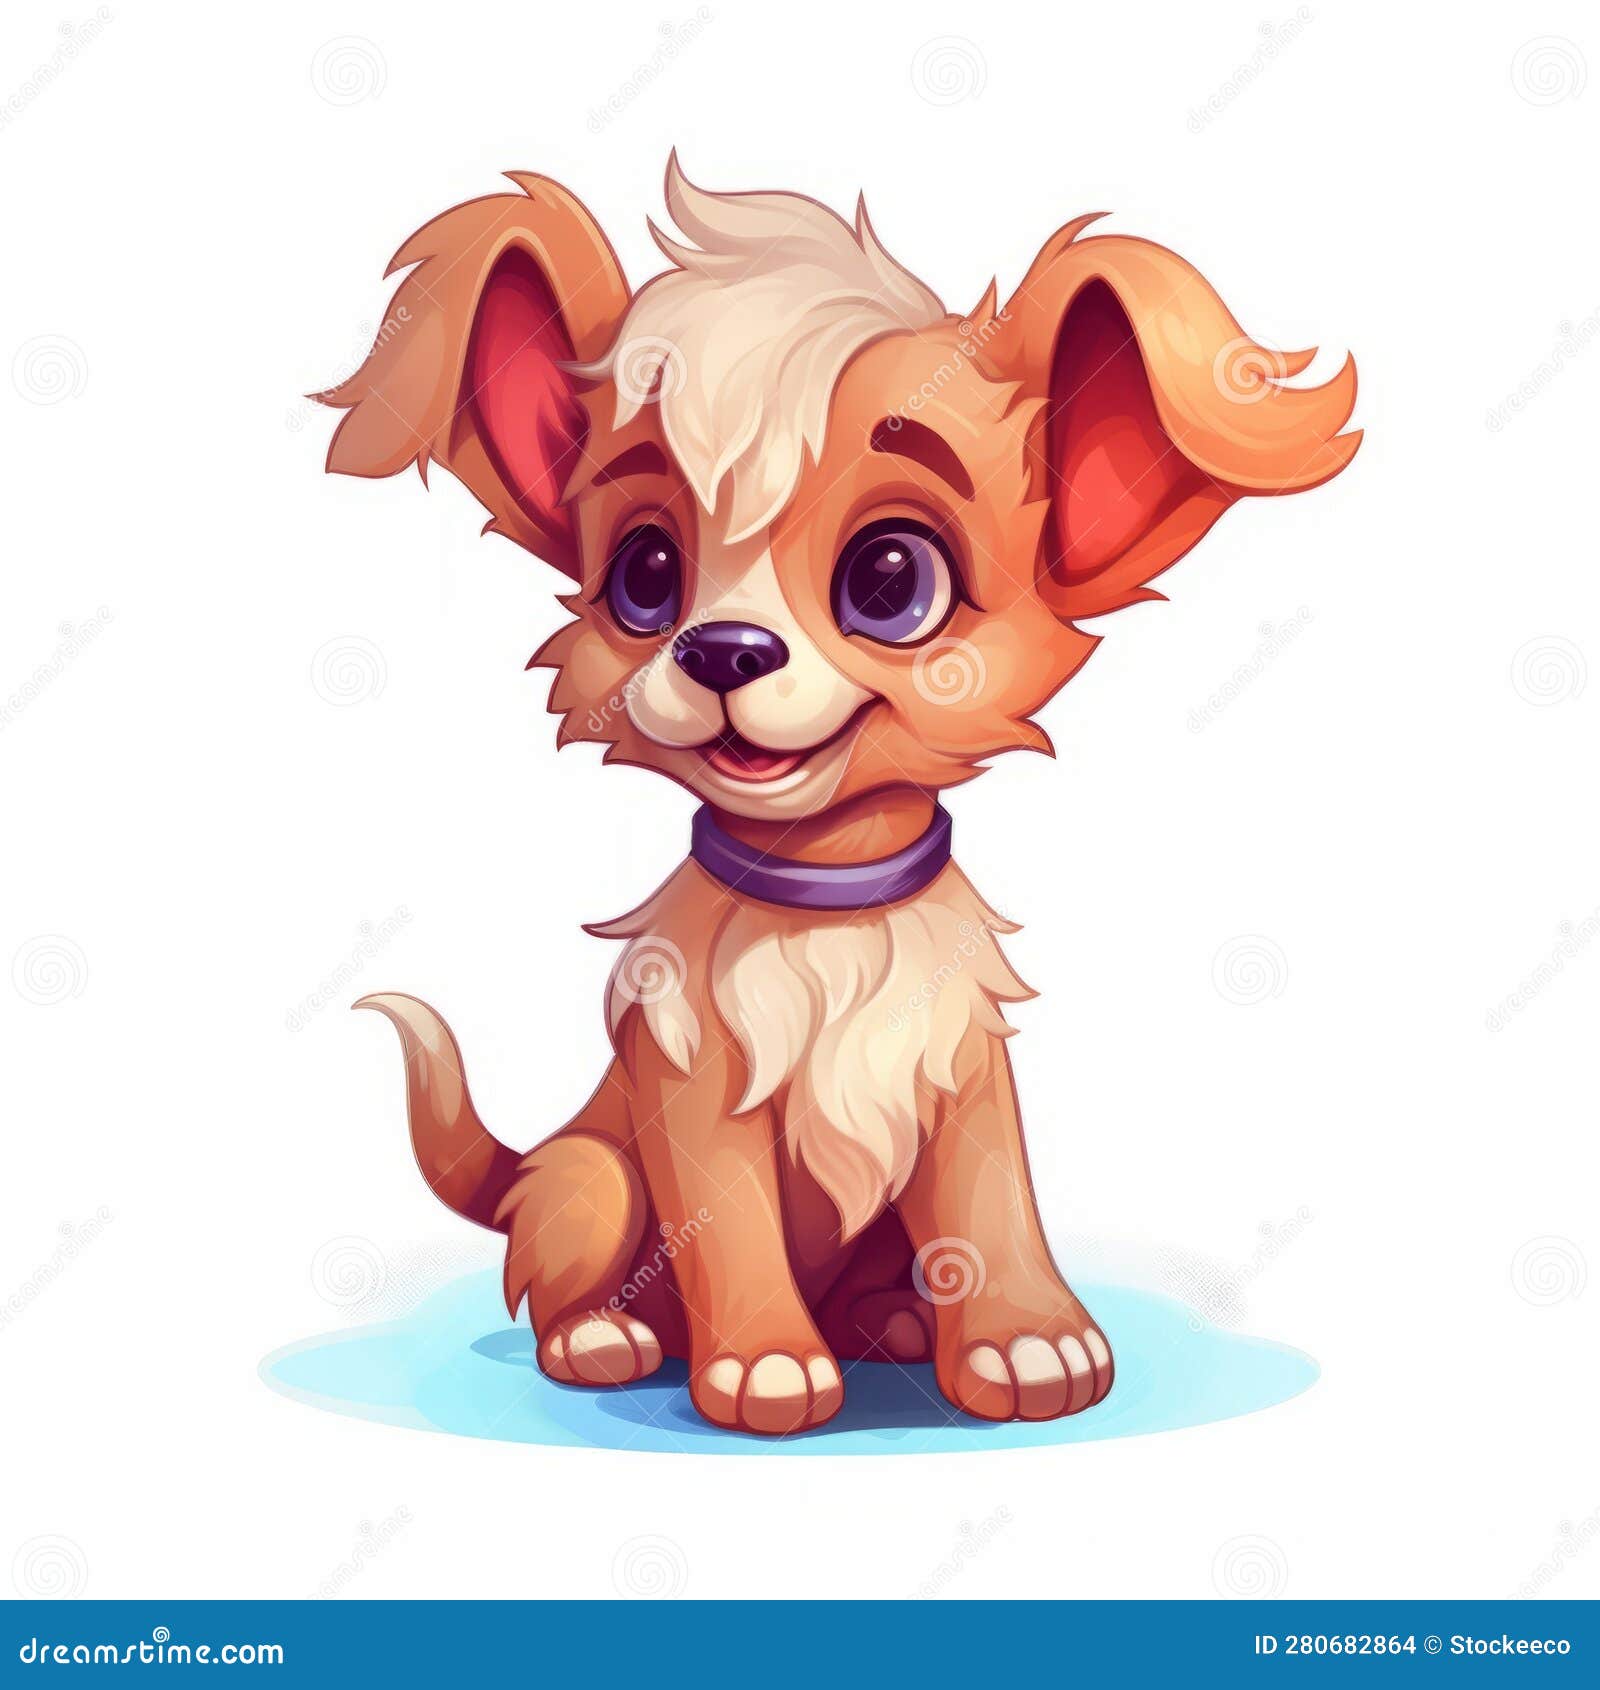 2400 Cute Anime Dogs Stock Photos Pictures  RoyaltyFree Images  iStock